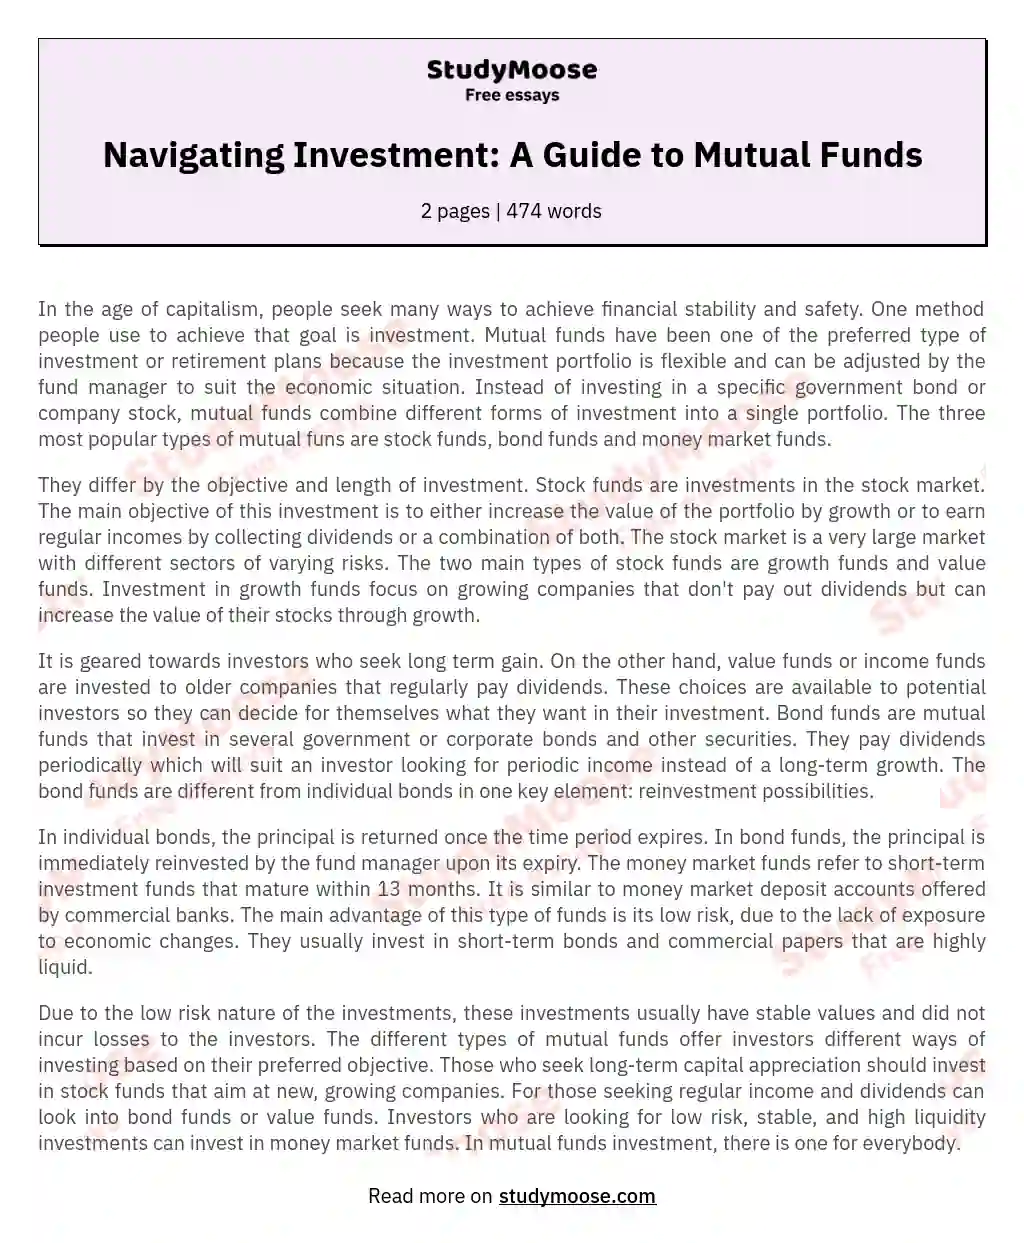 Navigating Investment: A Guide to Mutual Funds essay